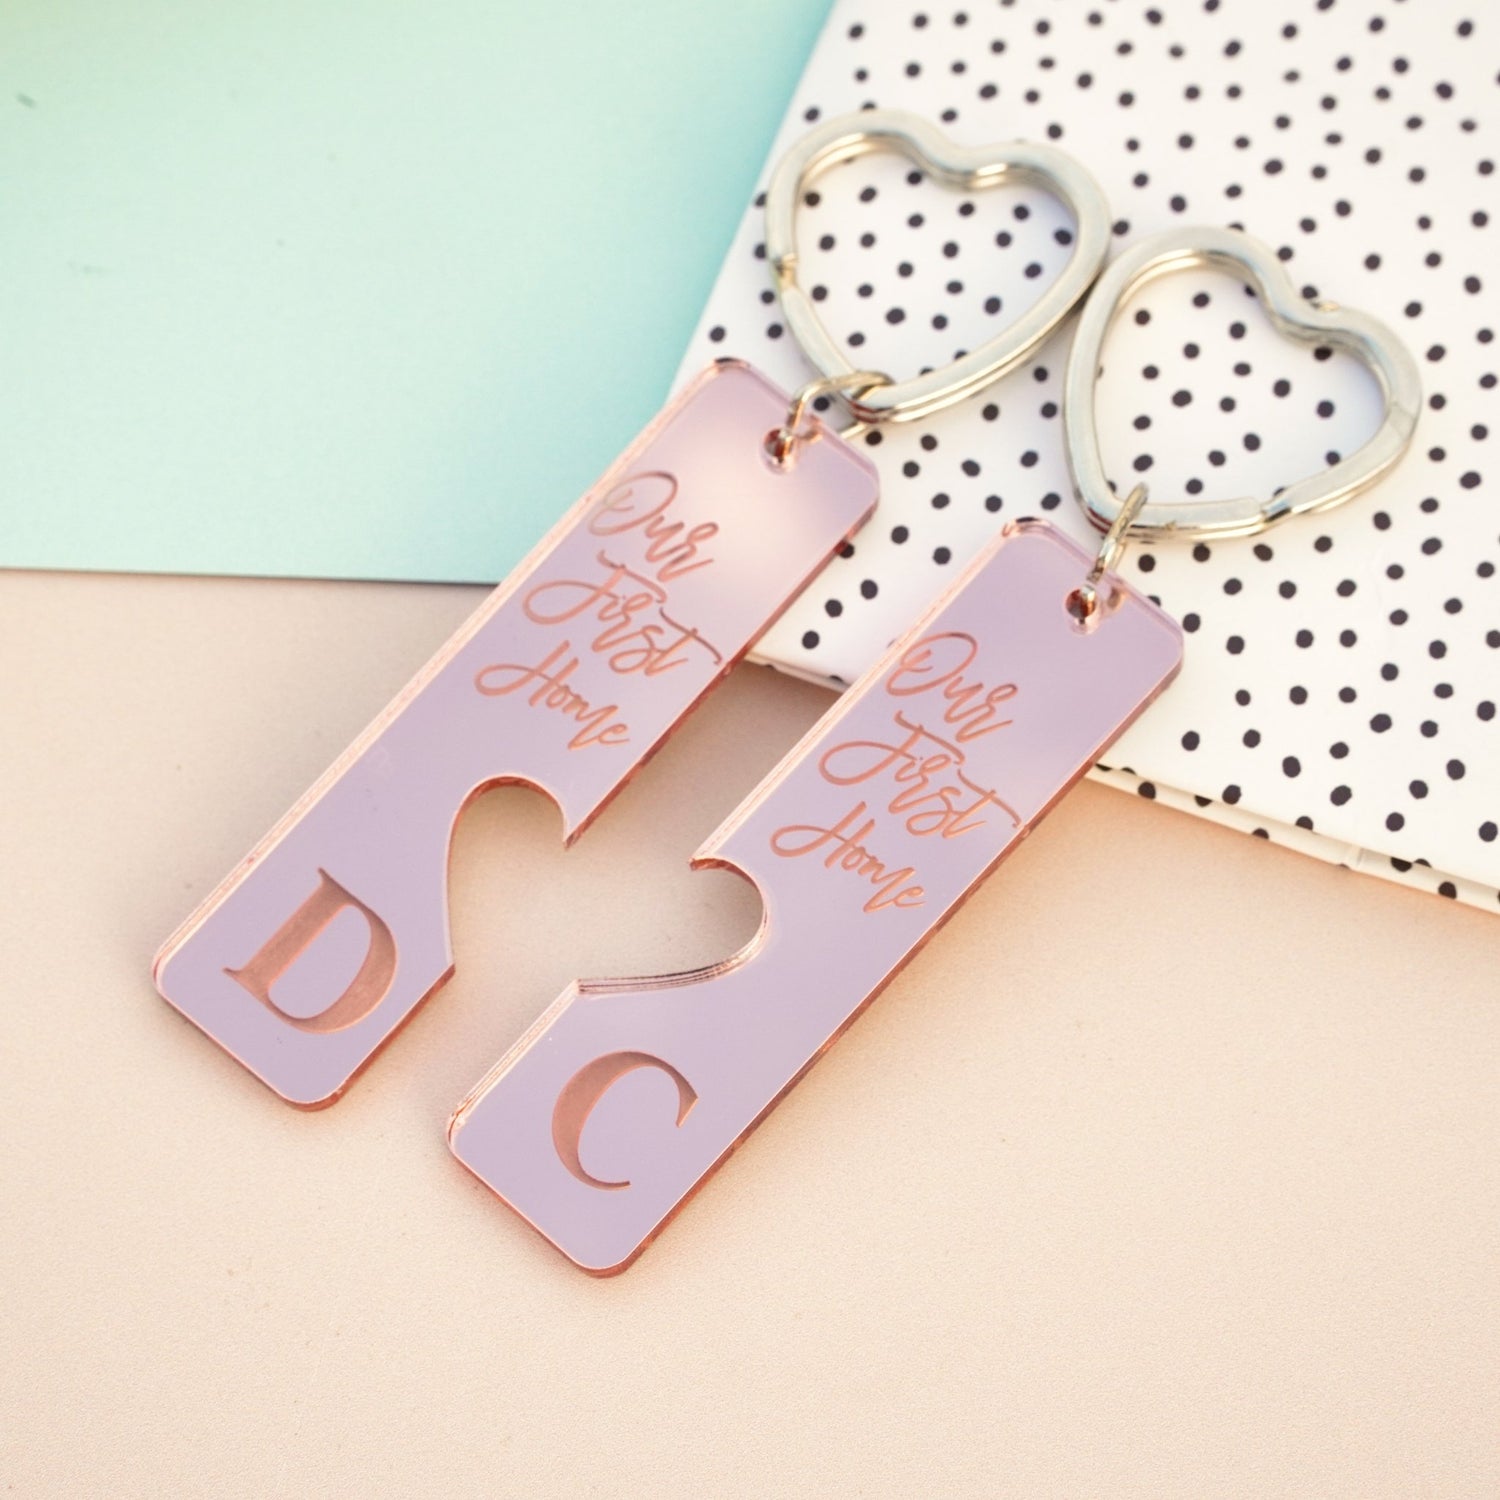 acrylic heart cut out new home key ring pair